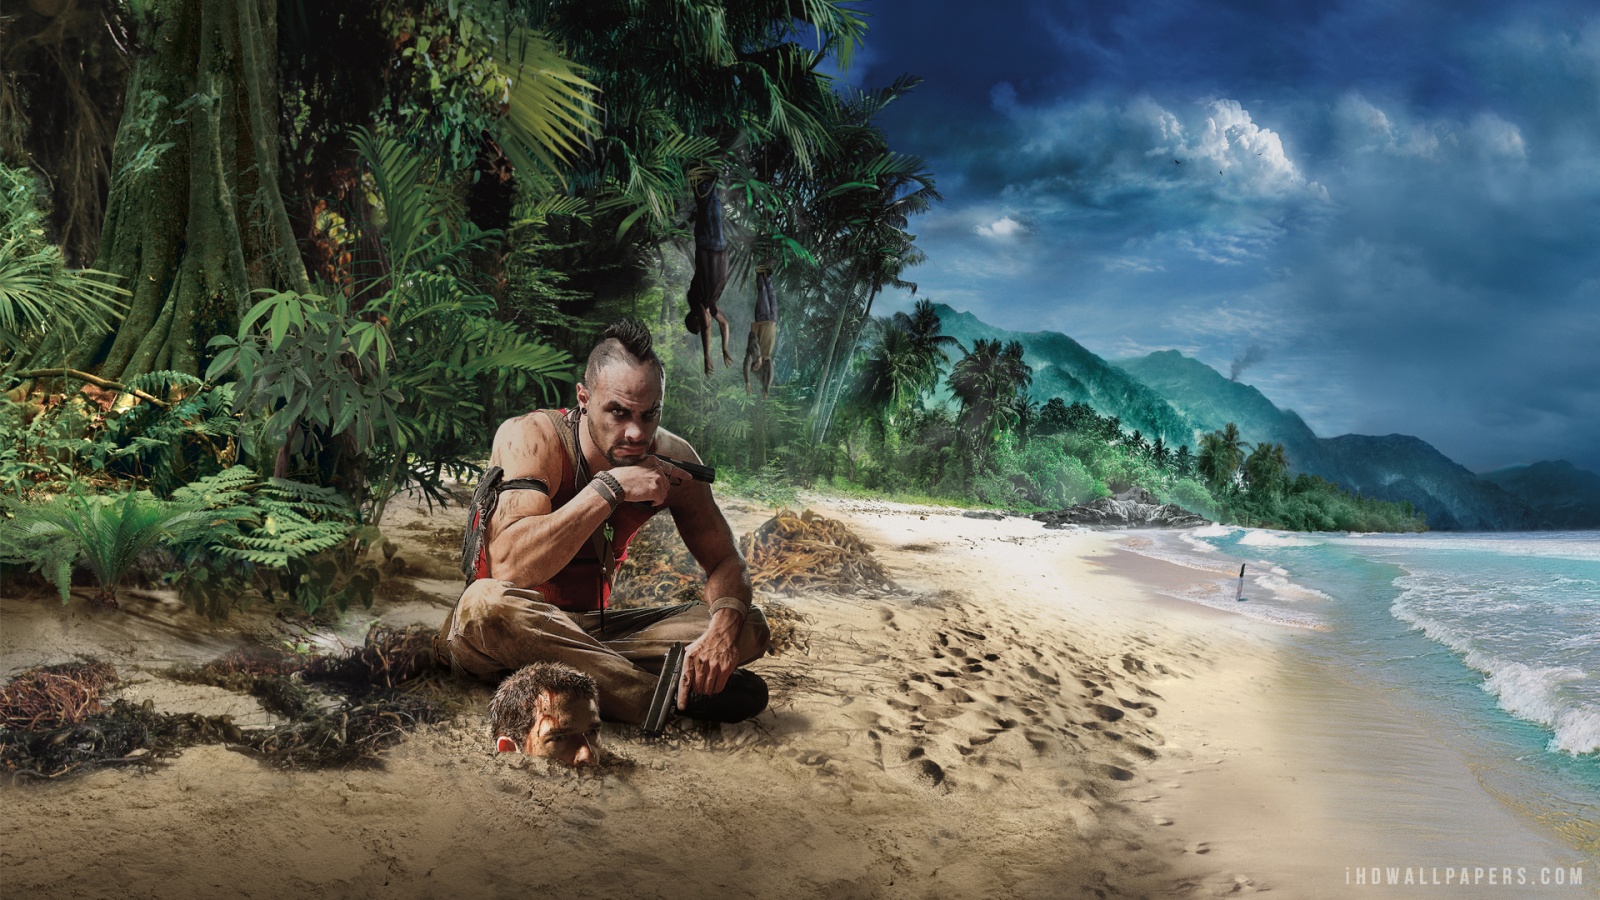 Far Cry 3 2013 Video Game HD Wallpaper   iHD Wallpapers 1600x900